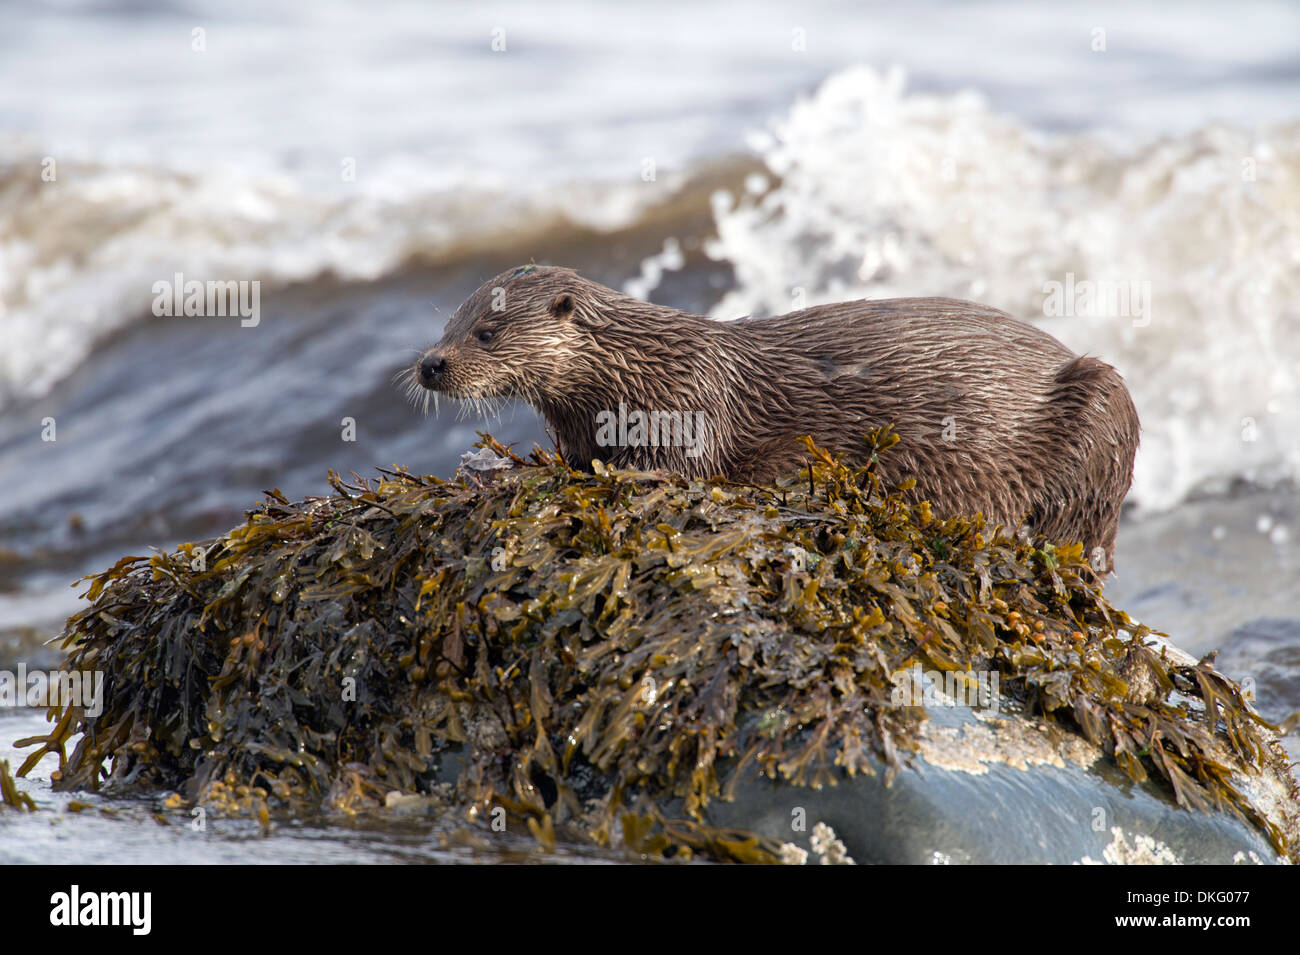 Otter (Lutra lutra), UK Stock Photo